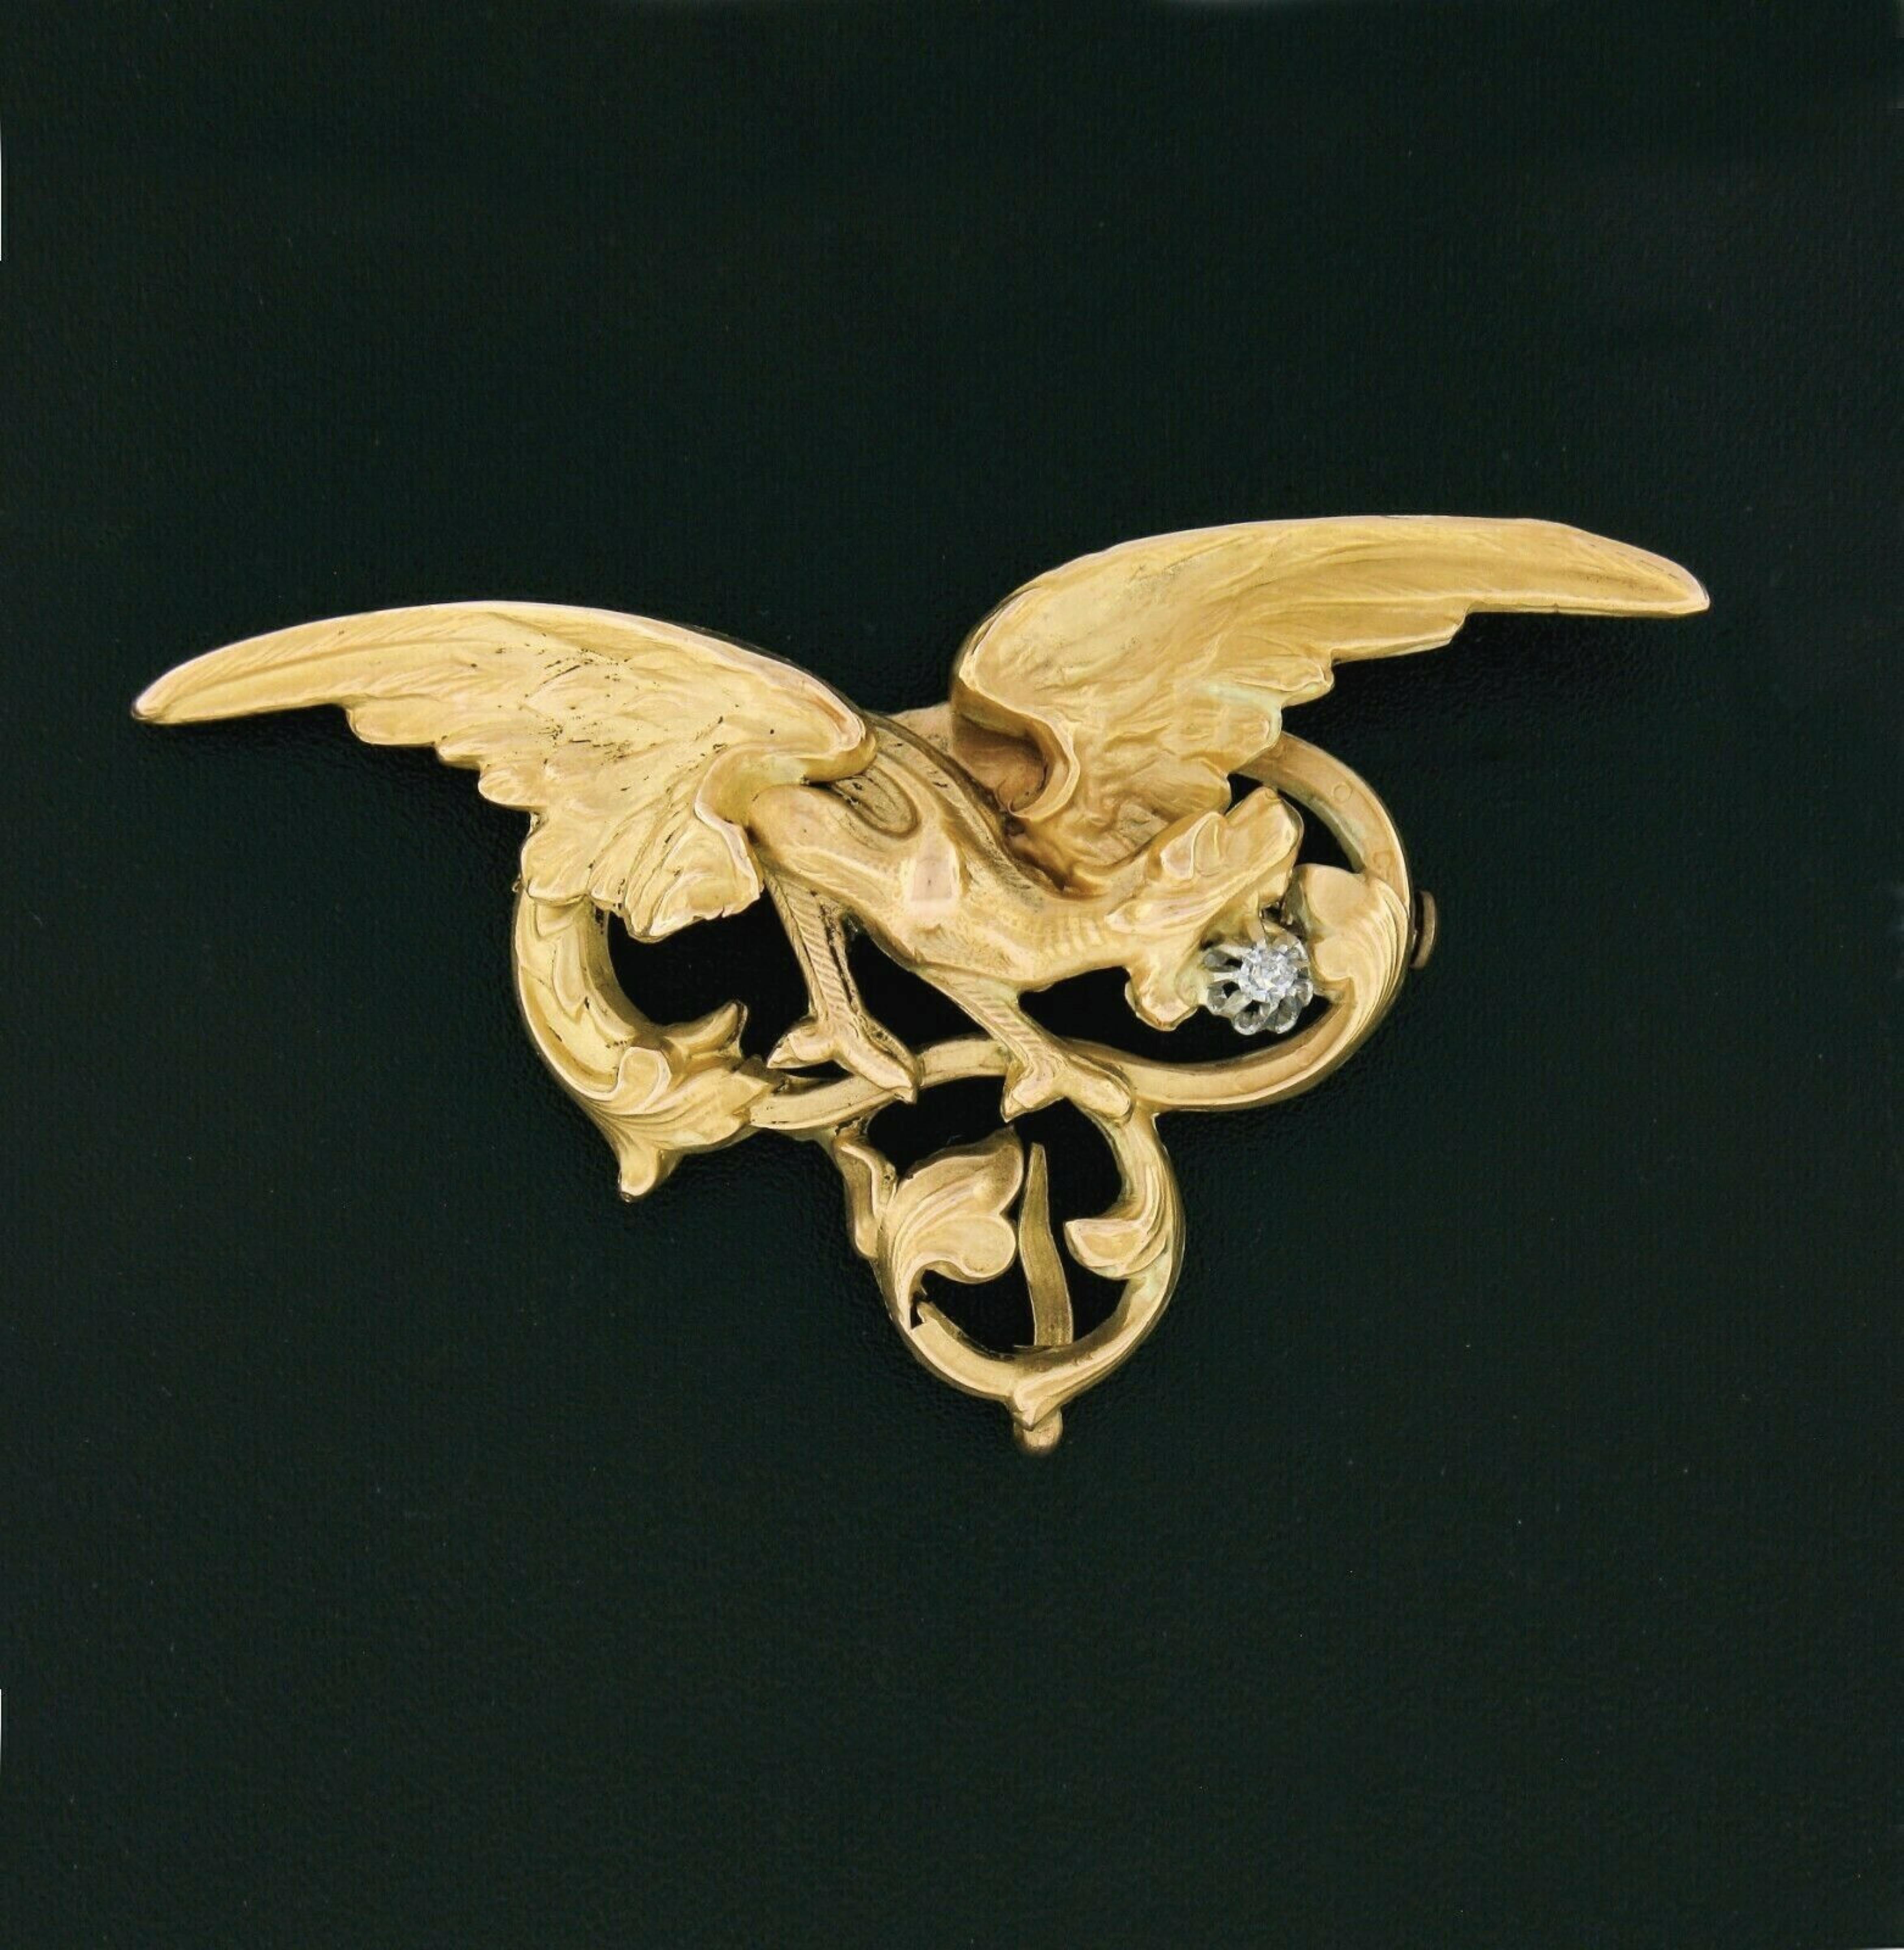 Here we have an outstanding antique brooch that was crafted during the art nouveau era from solid 14k yellow gold. The brooch features a large and very detailed 3D dragon design with a fine quality diamond neatly set at the center of a solid 14k